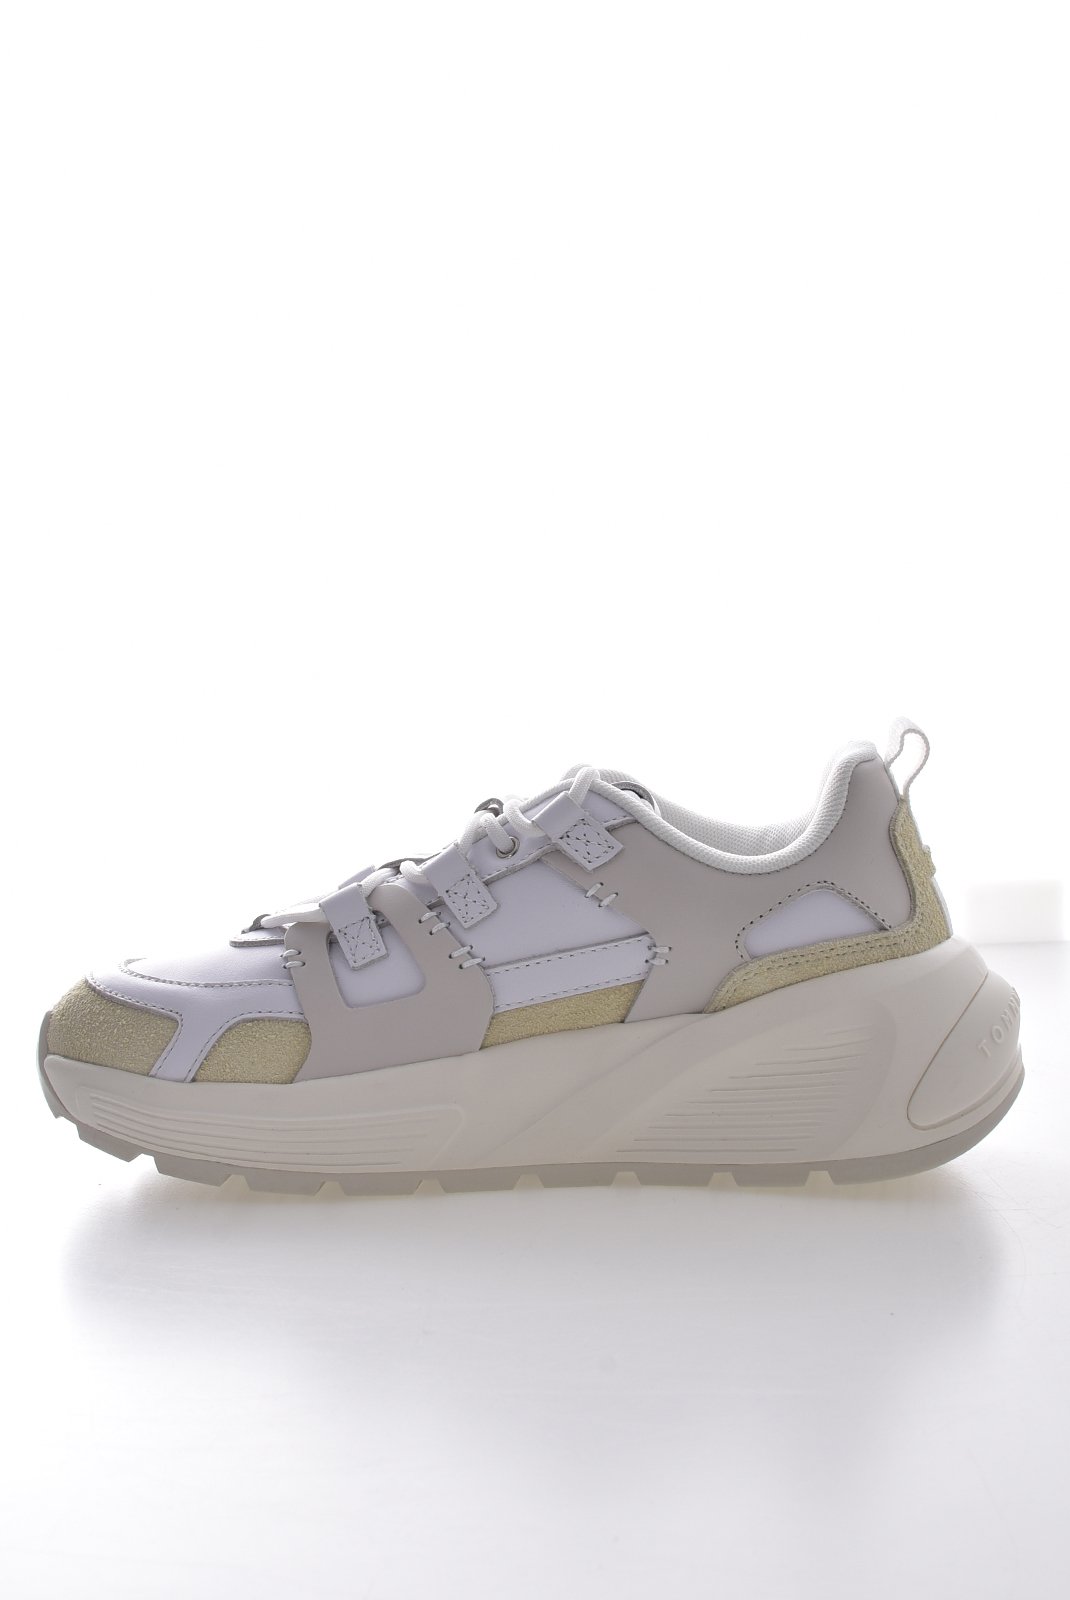 Baskets / Sneakers  Tommy Hilfiger FW0FW07709 YBS White